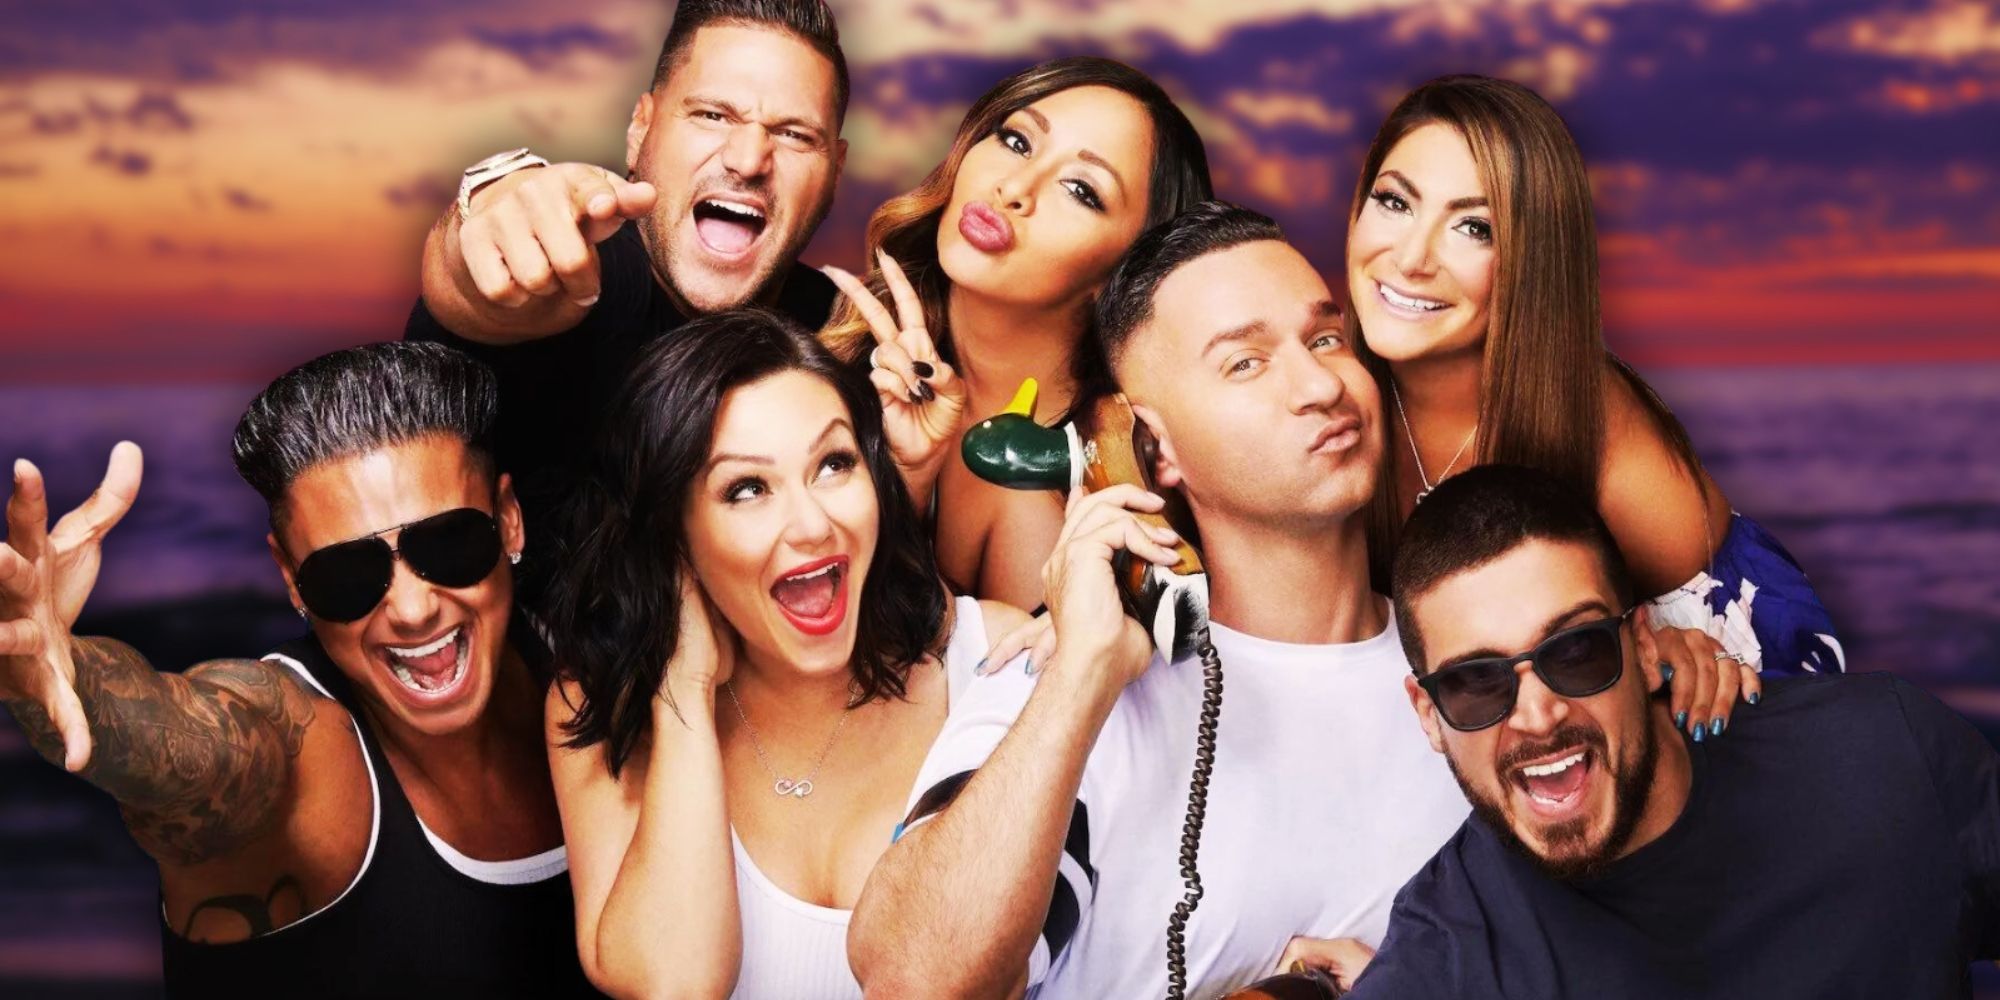 Jersey Shore Review: A Cheesy Situation - TV Fanatic